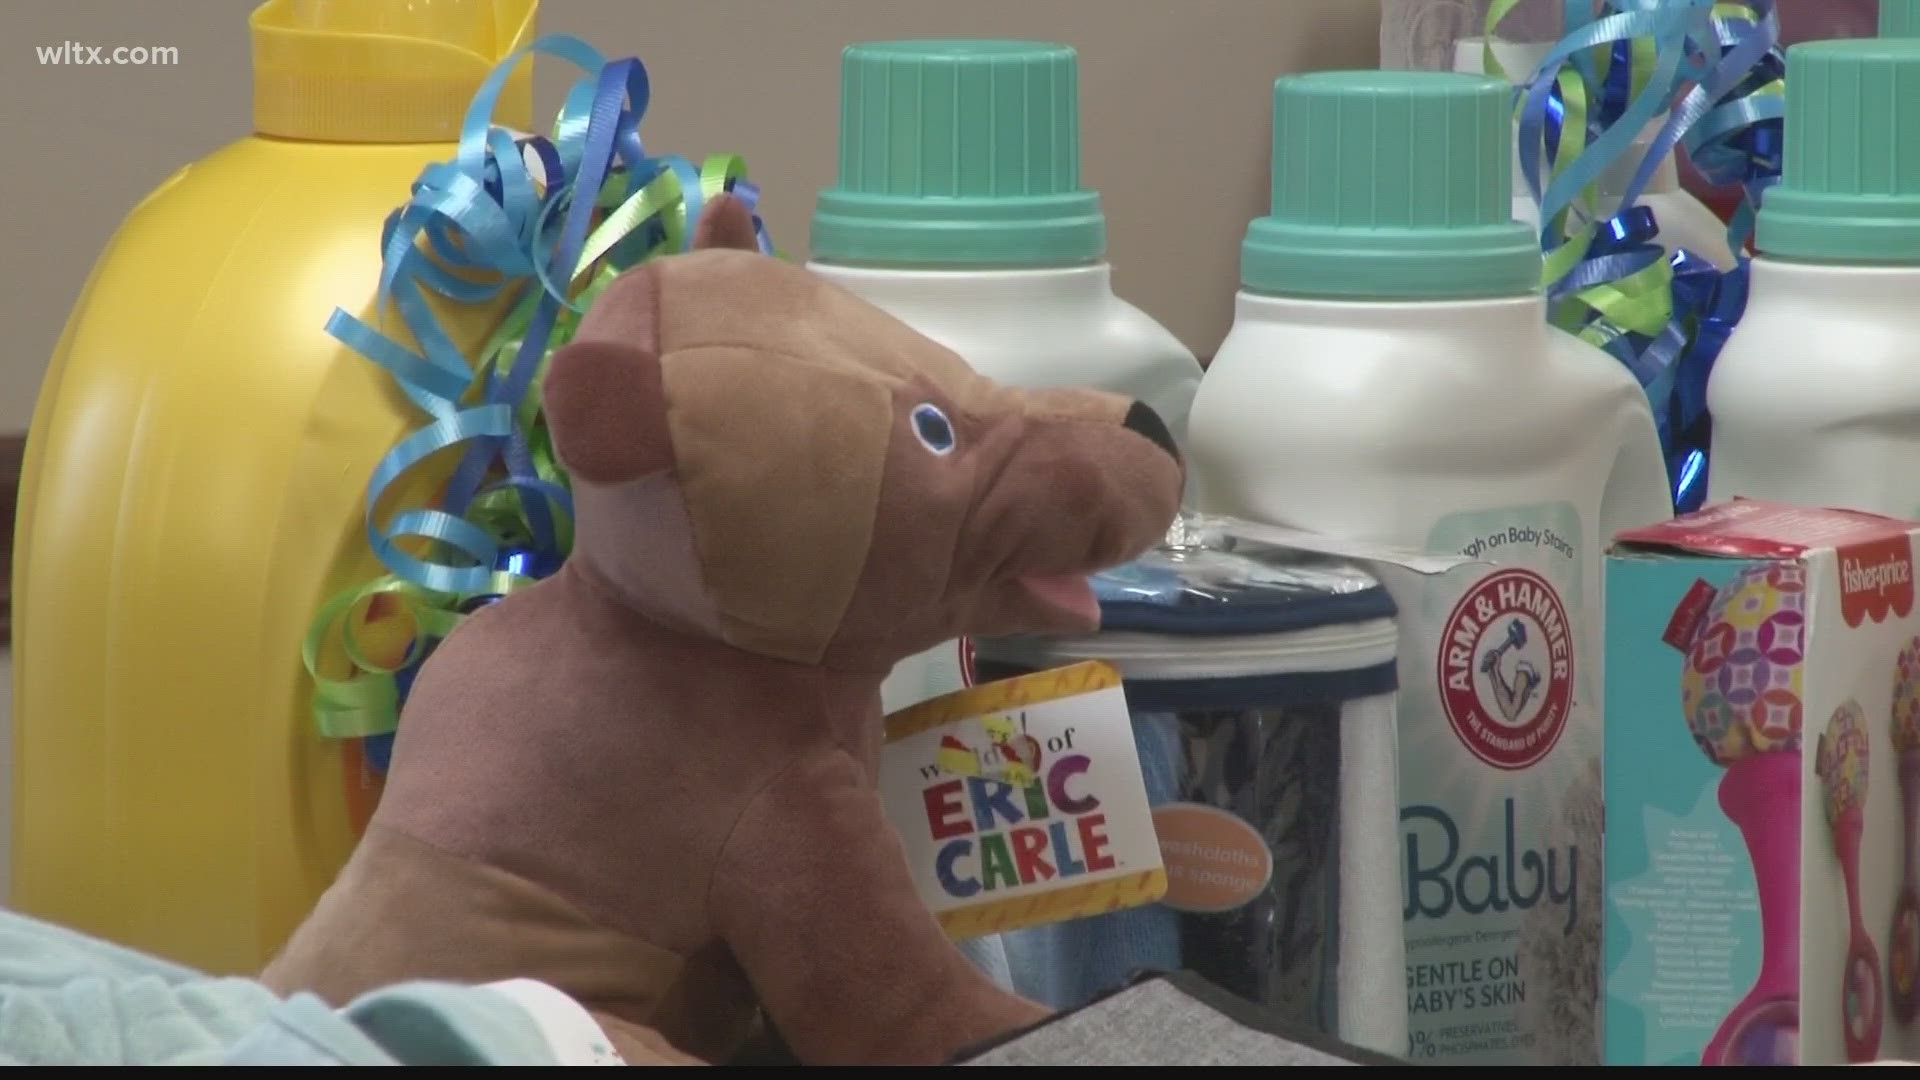 In the middle of what they've described as a food desert, one local church decided to host a community baby shower to spread hope and the gospel.